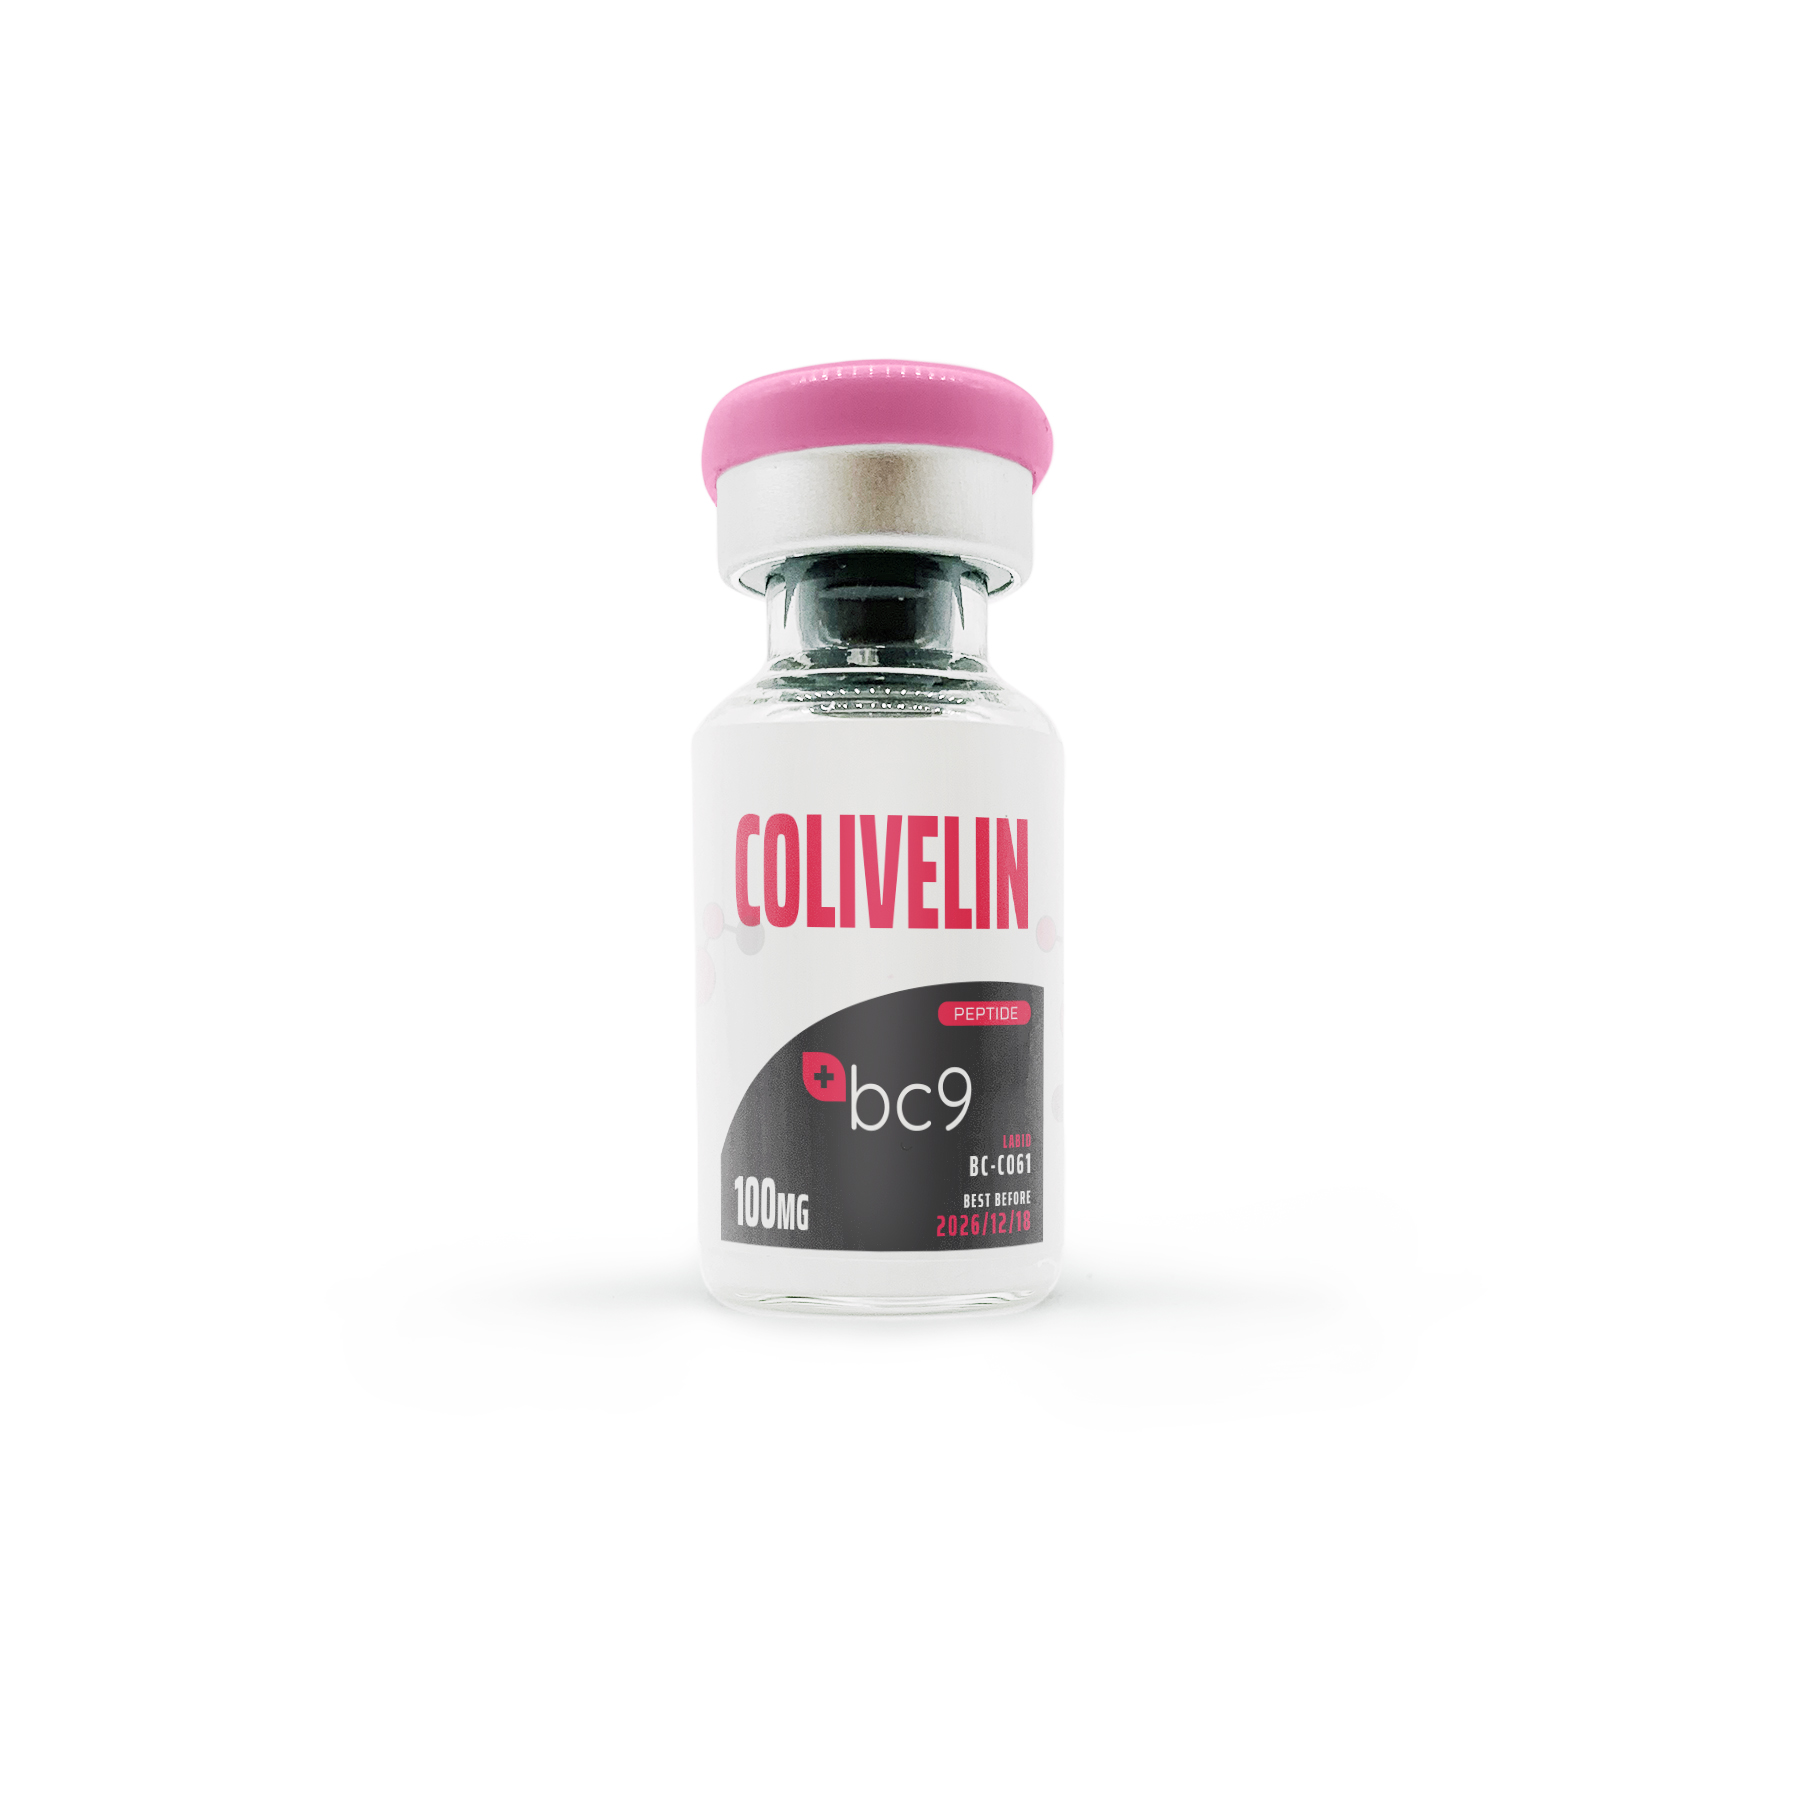 Colivelin Peptide for Sale | Fast Shipping | BC9.org